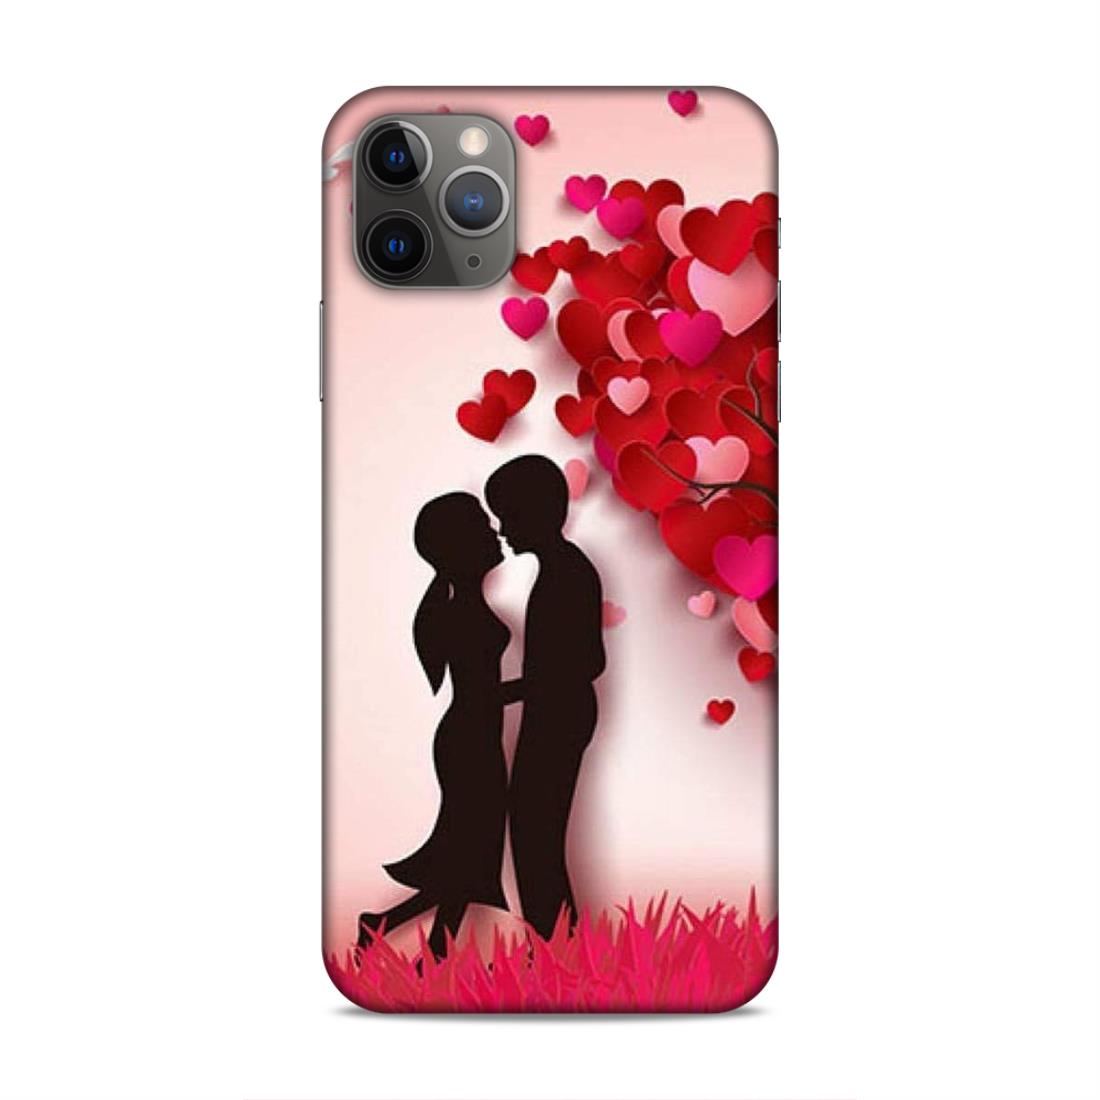 Couple Love Hard Back Case For Apple iPhone 11 Pro Max